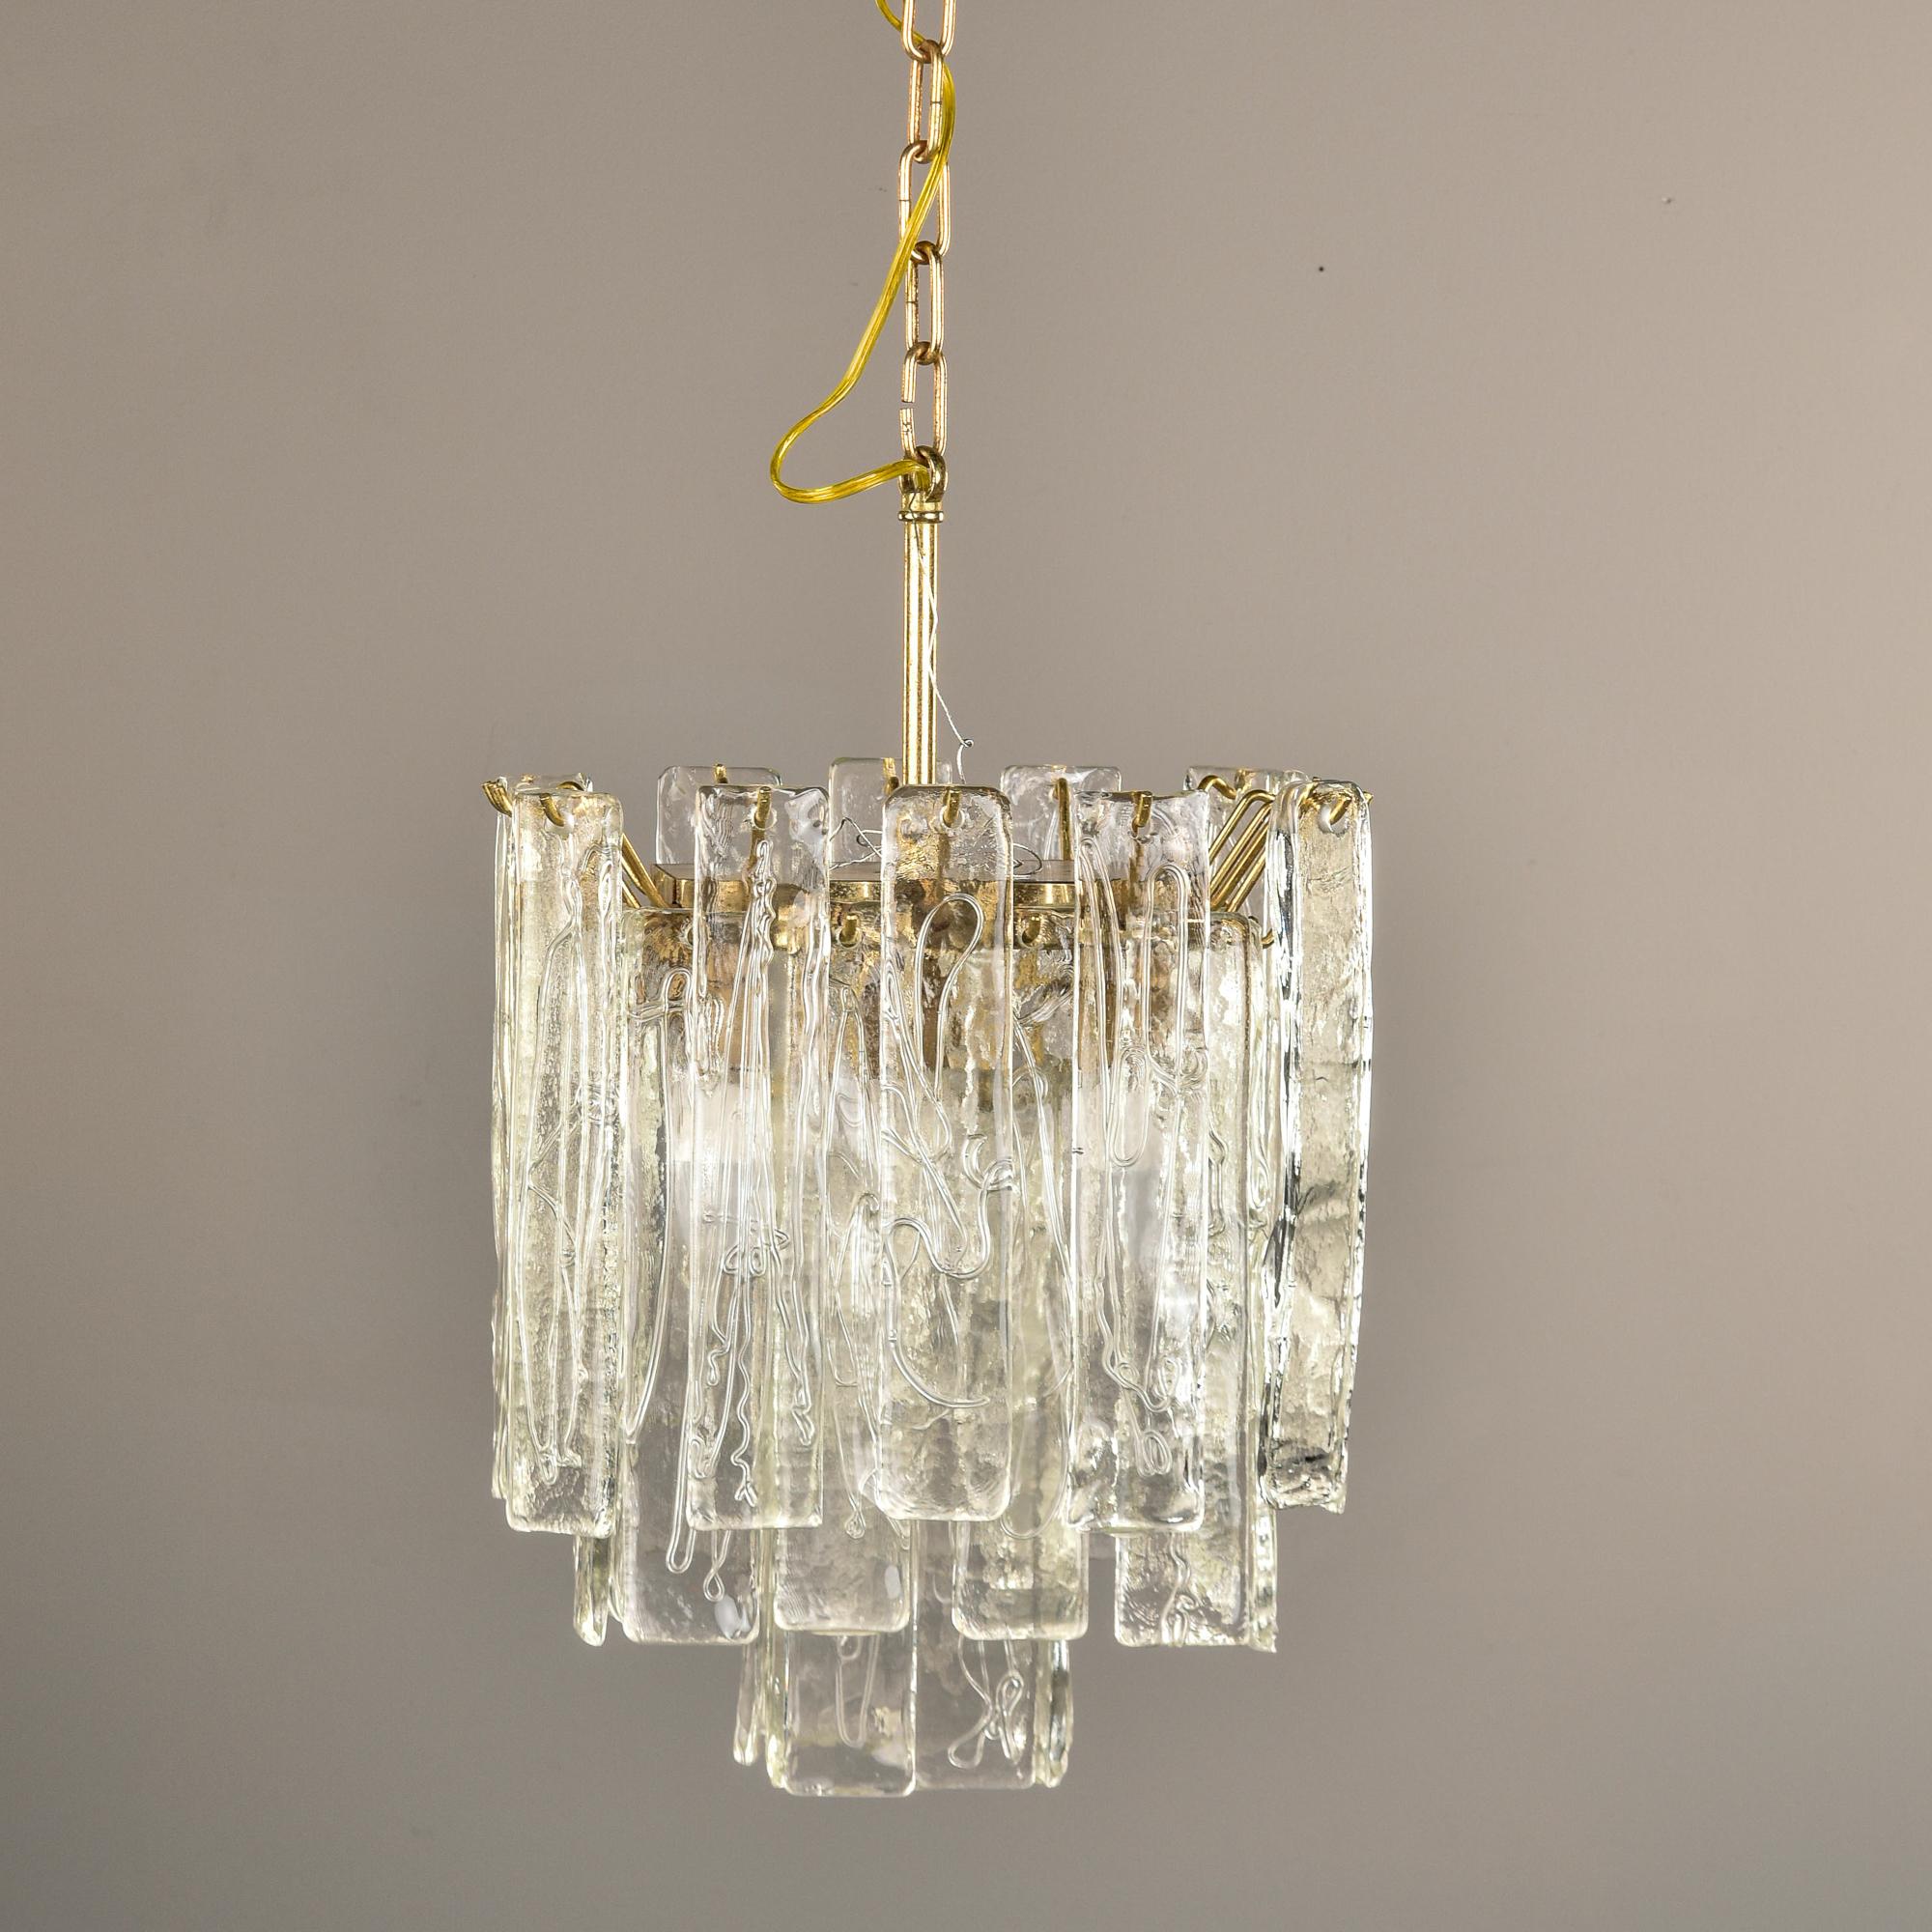 Found in Italy, this hanging light fixture dates from the 1960s and features Murano glass pendants hung from a polished brass frame. Pendants are rectangular, made of clear Murano glass with abstract surface texture details arranged in three